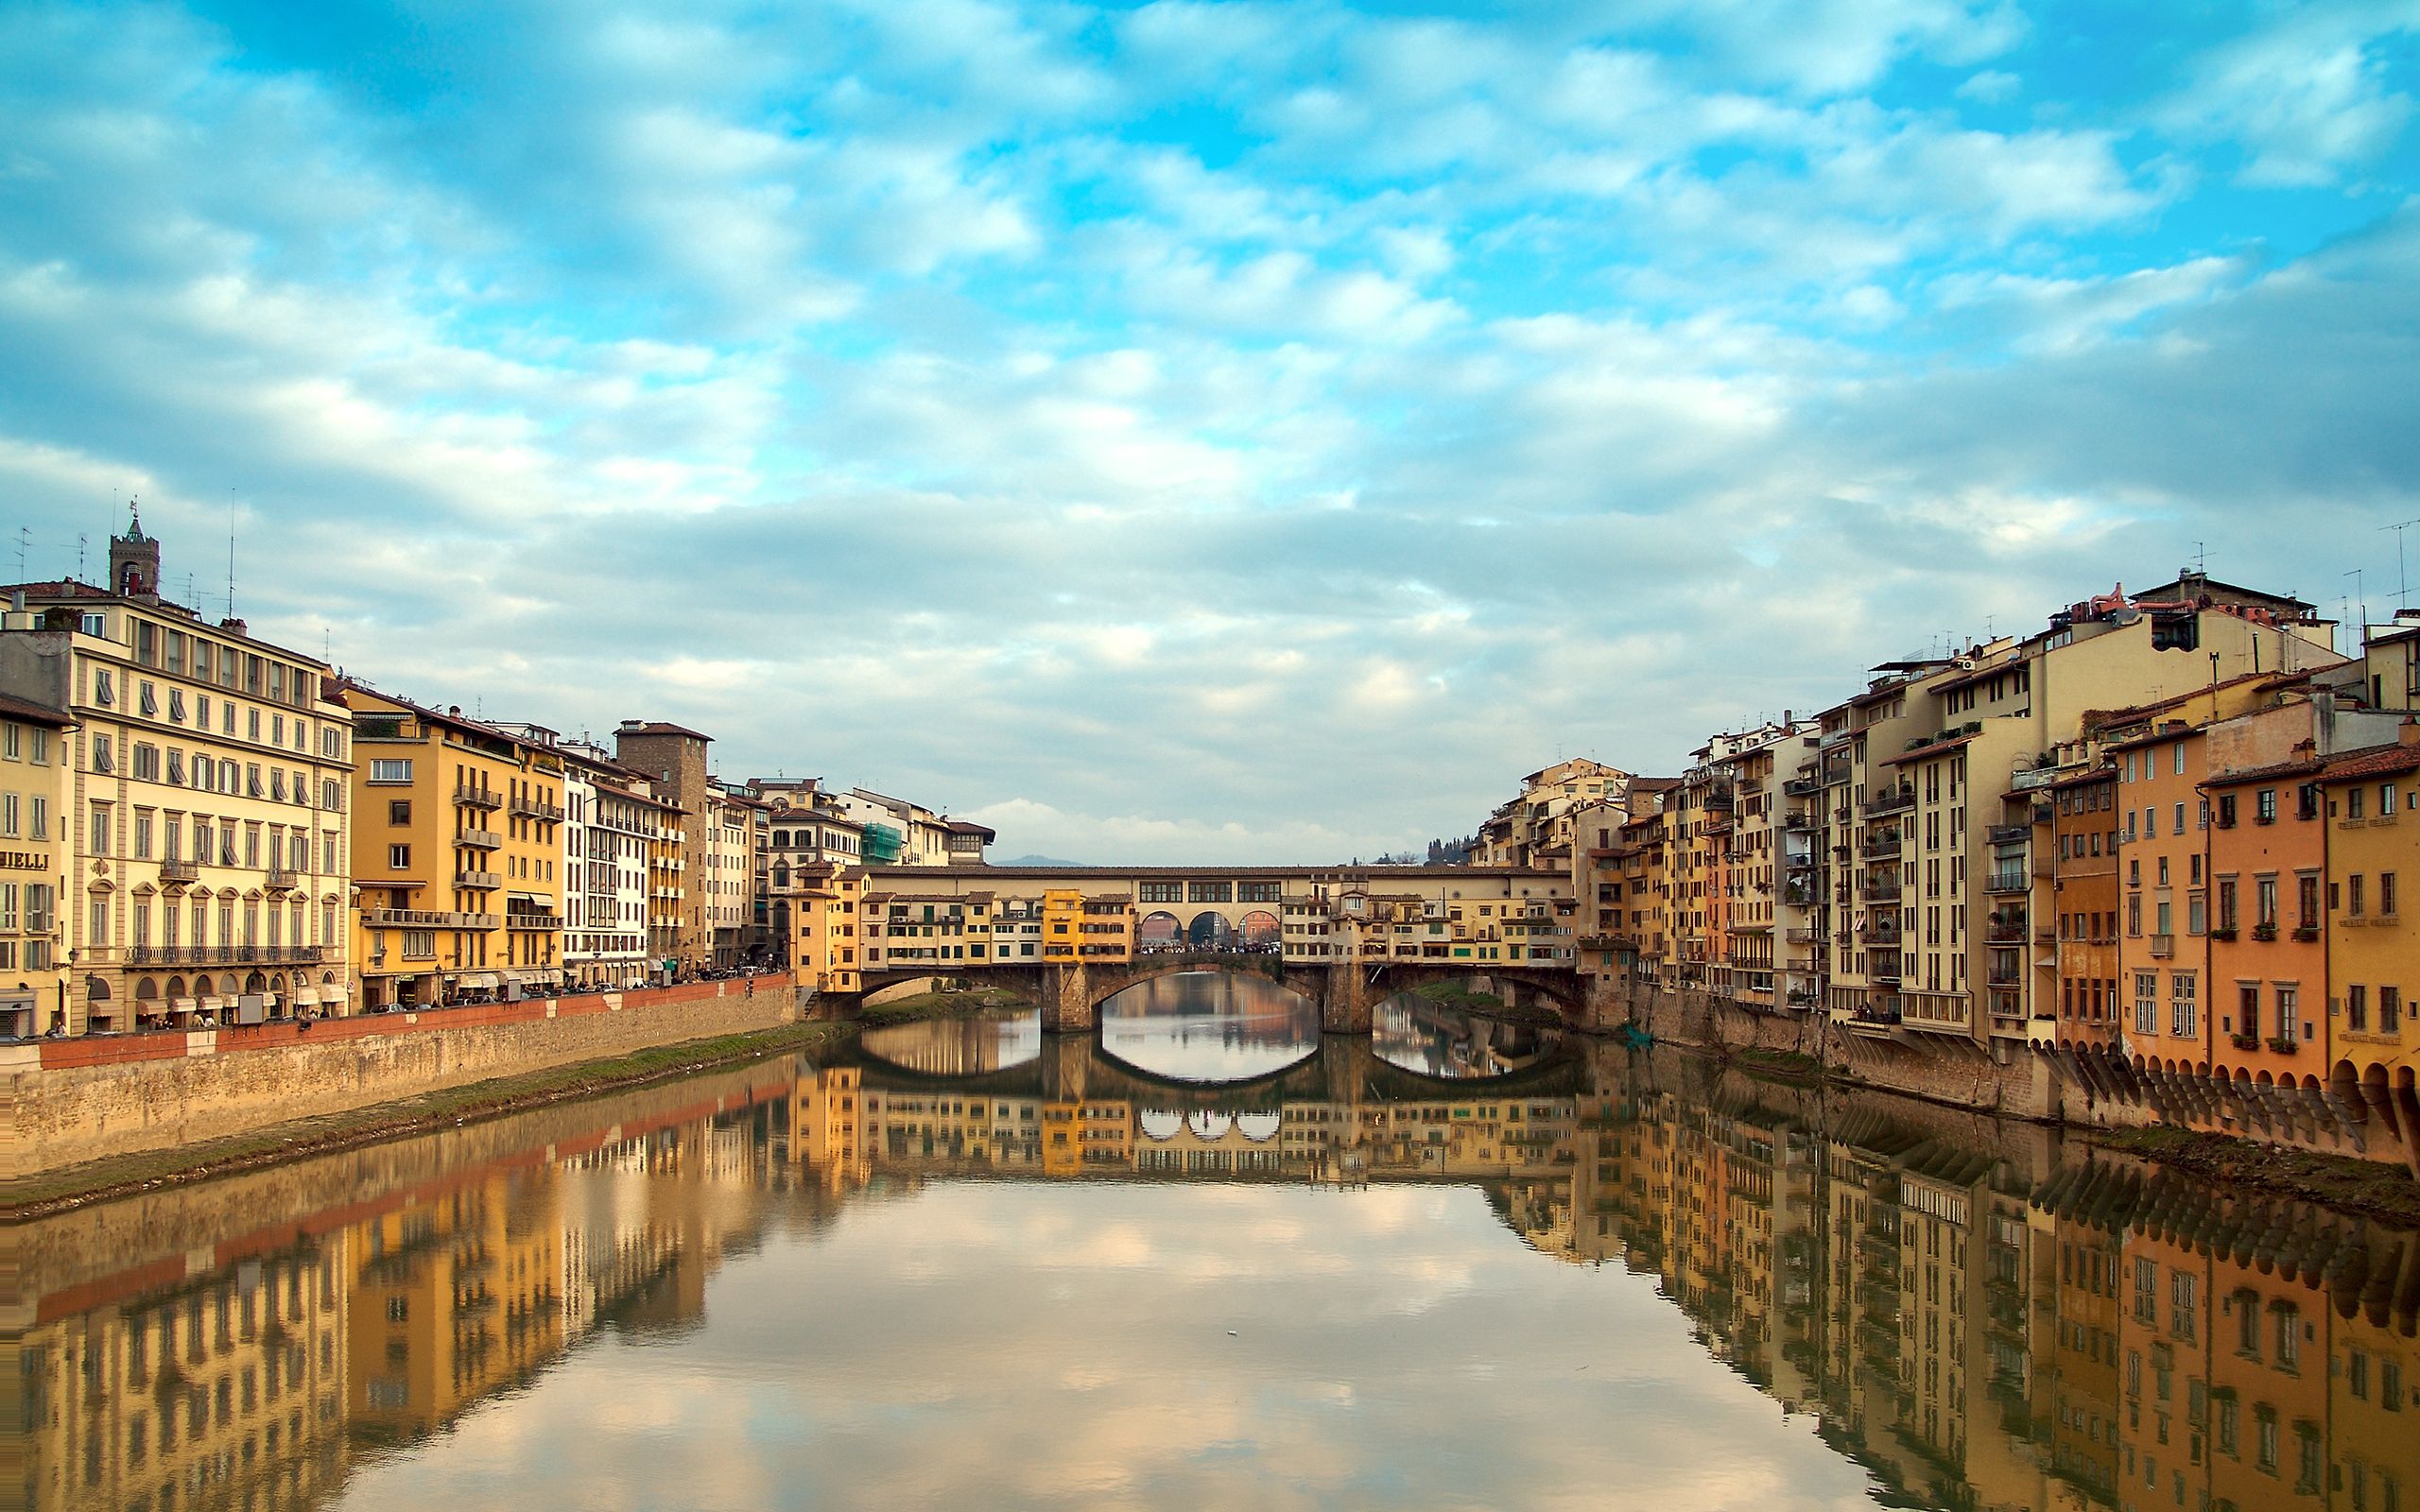 131988 download wallpaper cities, italy, florence, ponte vecchio, new year's eve screensavers and pictures for free